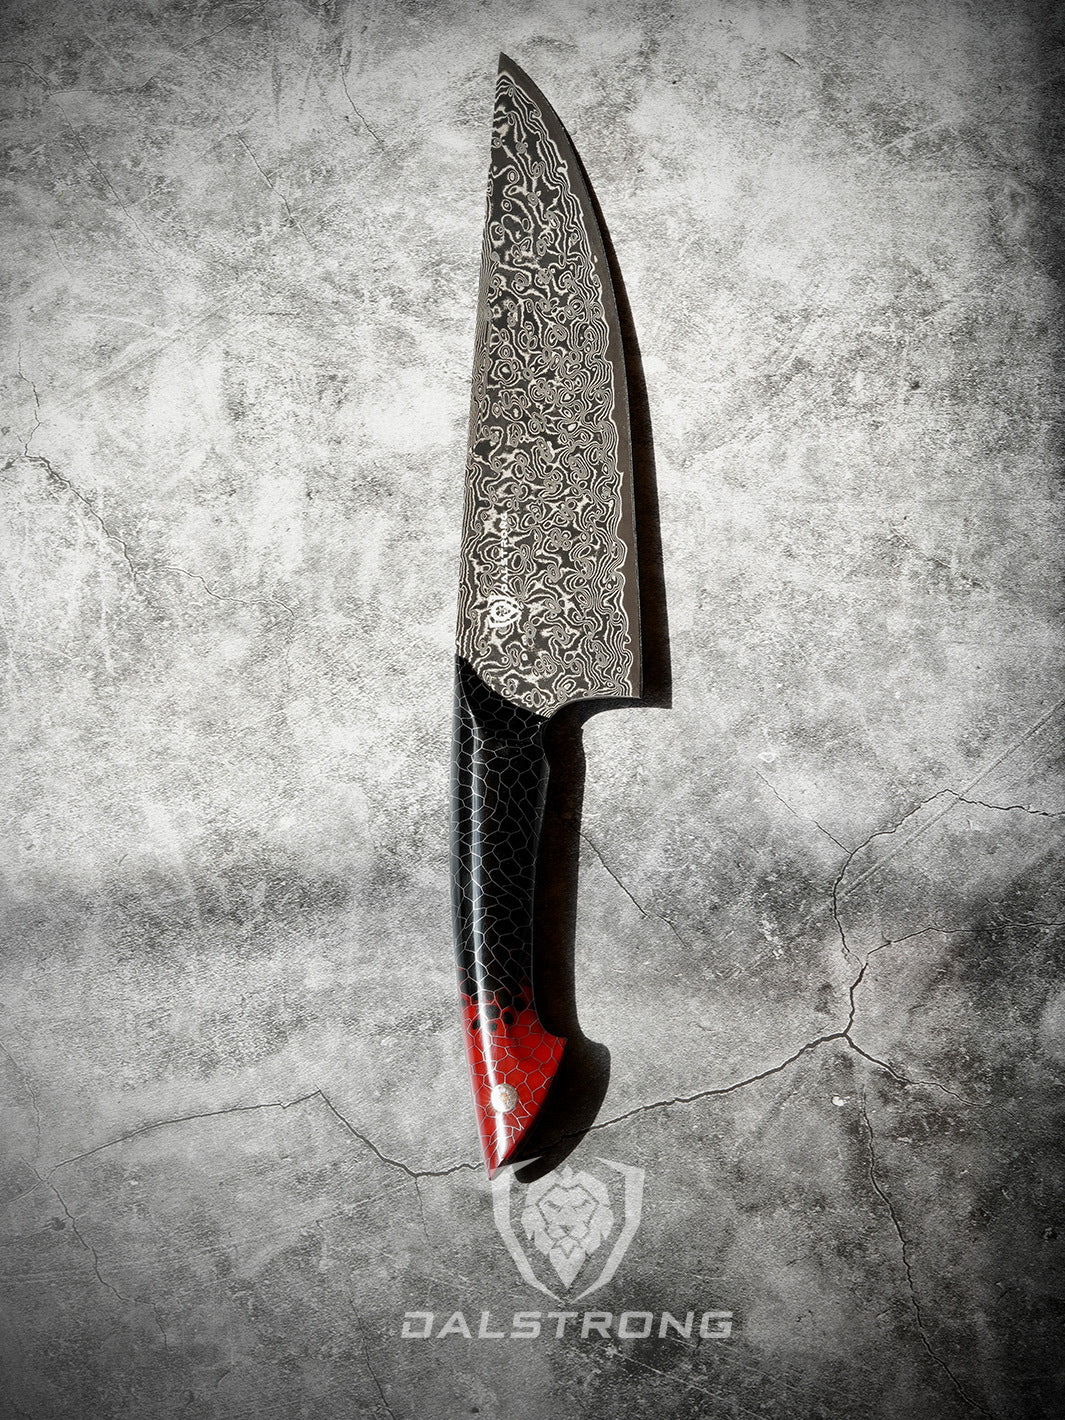 Quantum 1 Series 9.5 Chef Knife | Dalstrong Knives